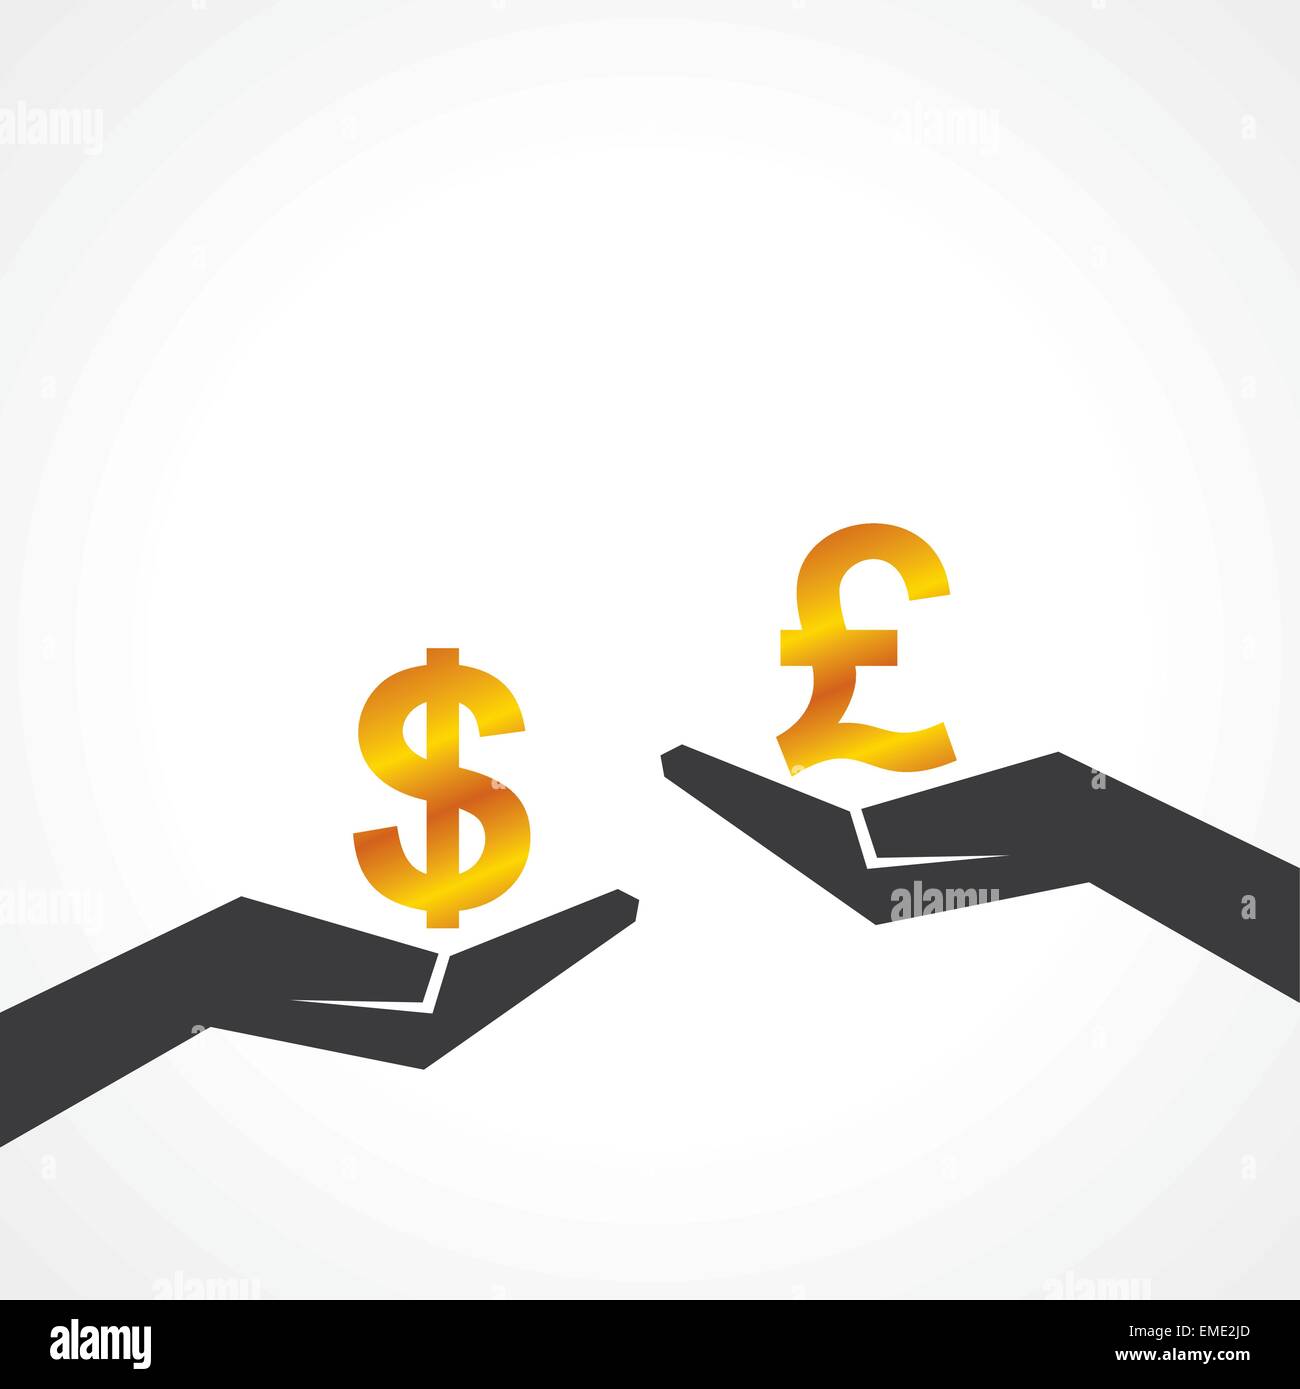 Hand hold dollar and pound symbol to compare their value stock vector Stock Vector